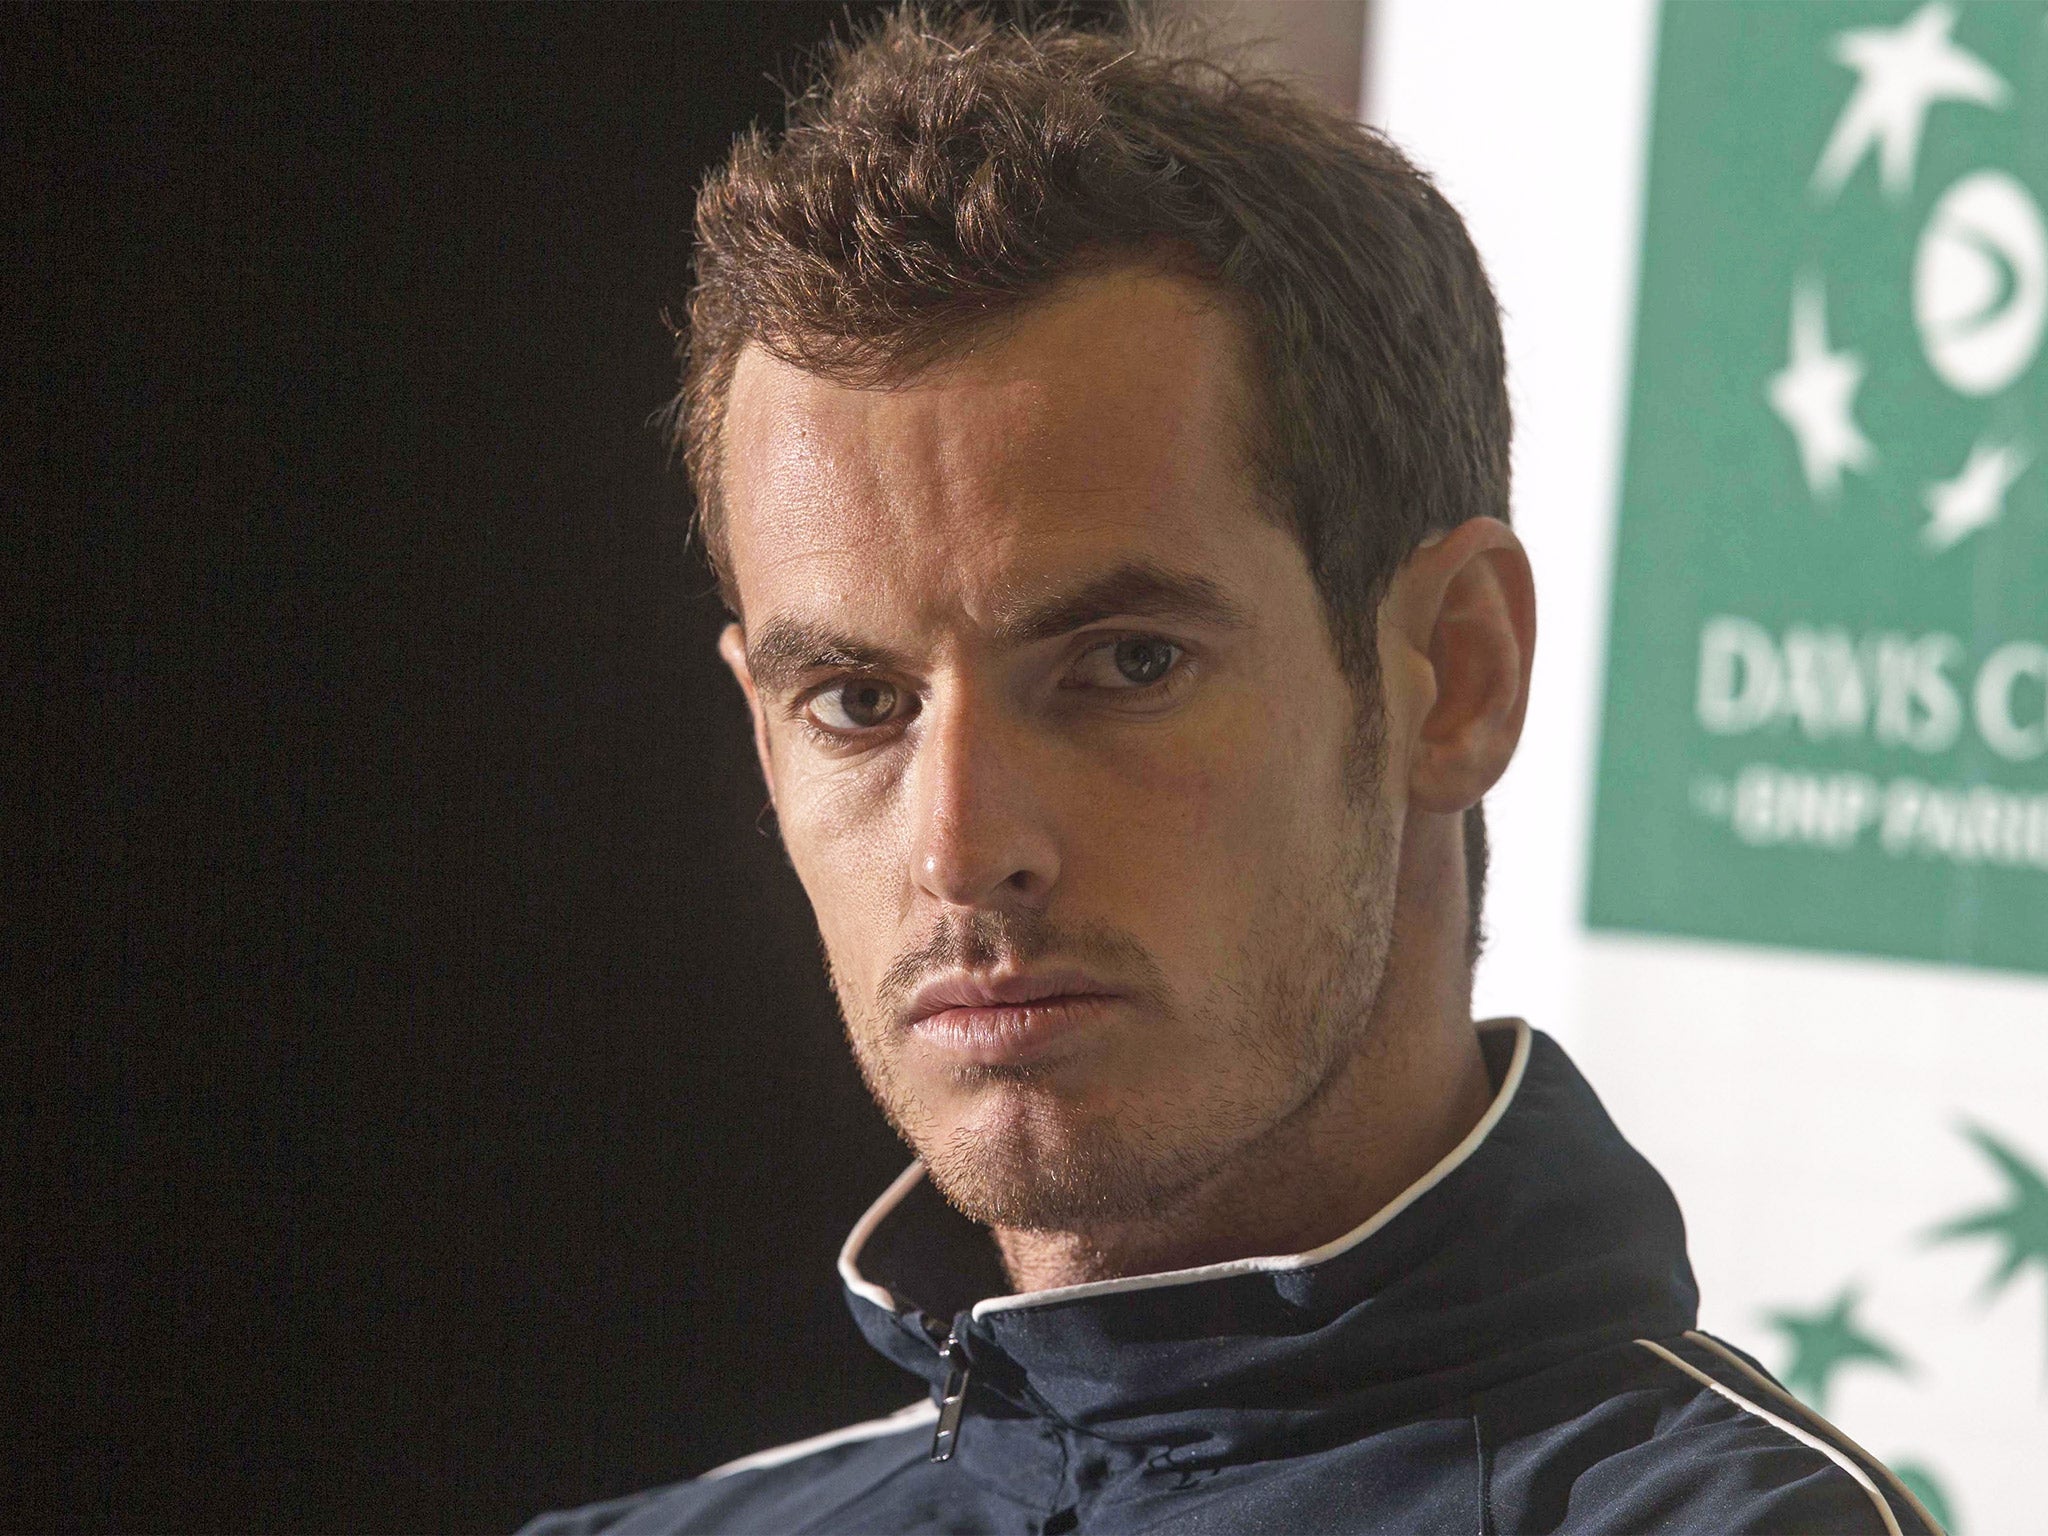 Andy Murray bristled when asked about Scottish independence